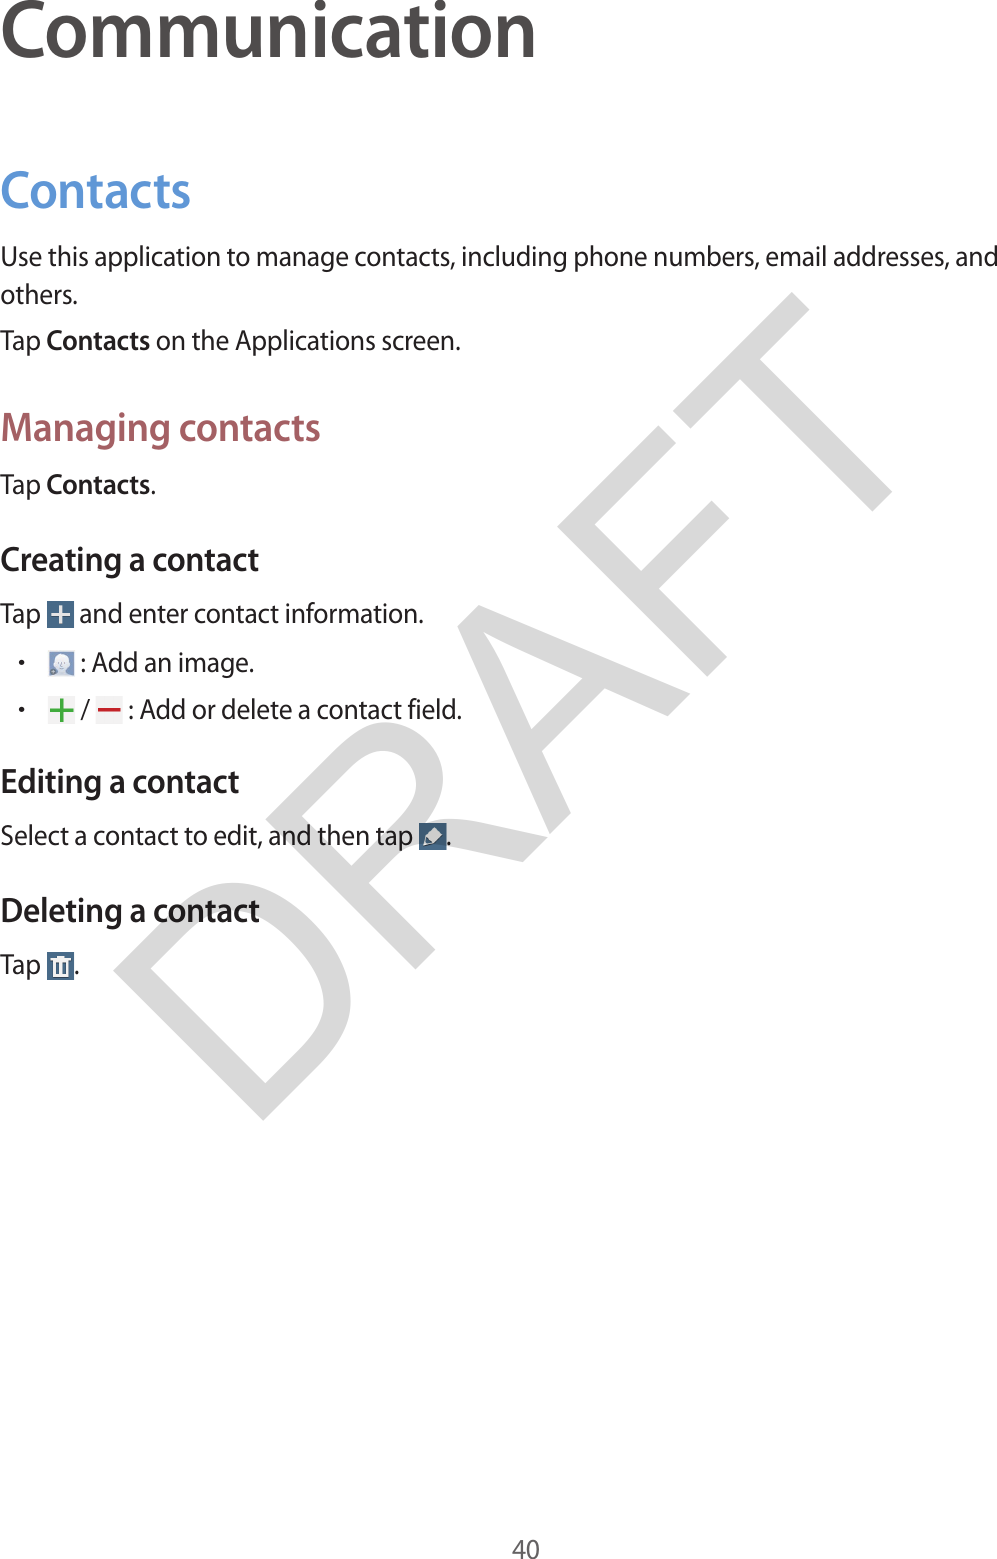 40CommunicationContactsUse this application to manage contacts, including phone numbers, email addresses, and others.Tap Contacts on the Applications screen.Managing contactsTap Contacts.Creating a contactTap   and enter contact information.•: Add an image.•/   : Add or delete a contact field.Editing a contactSelect a contact to edit, and then tap  .Deleting a contactTap  .DRAFT